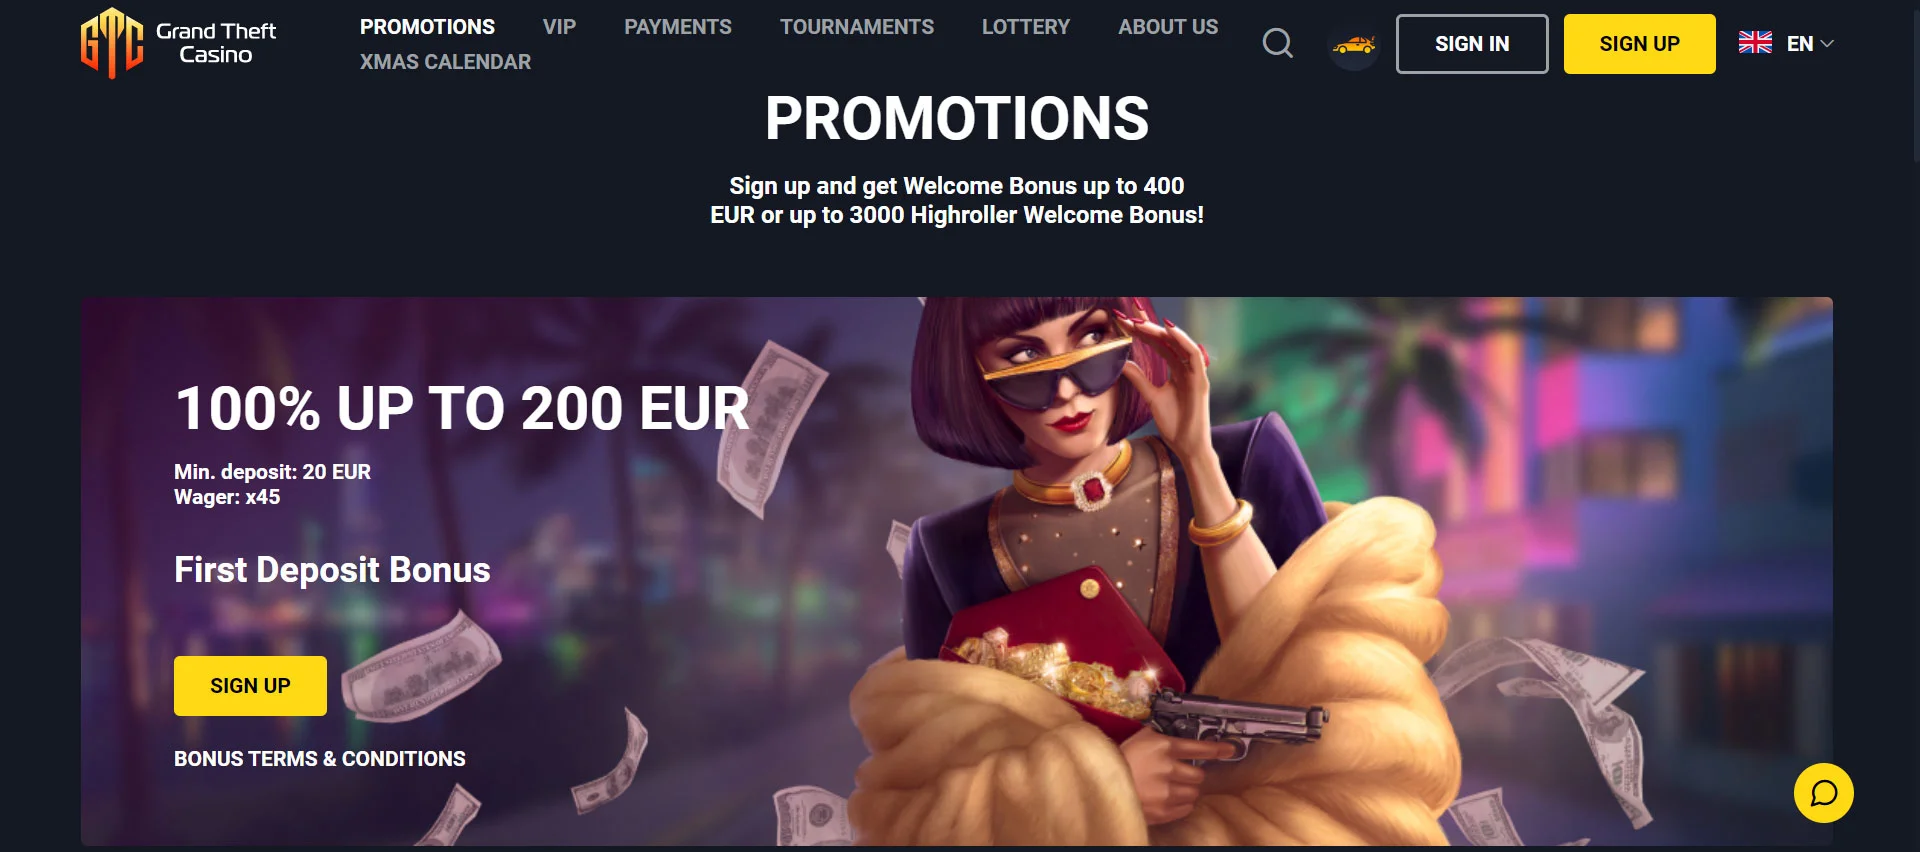 Grand Theft Casino Promotions